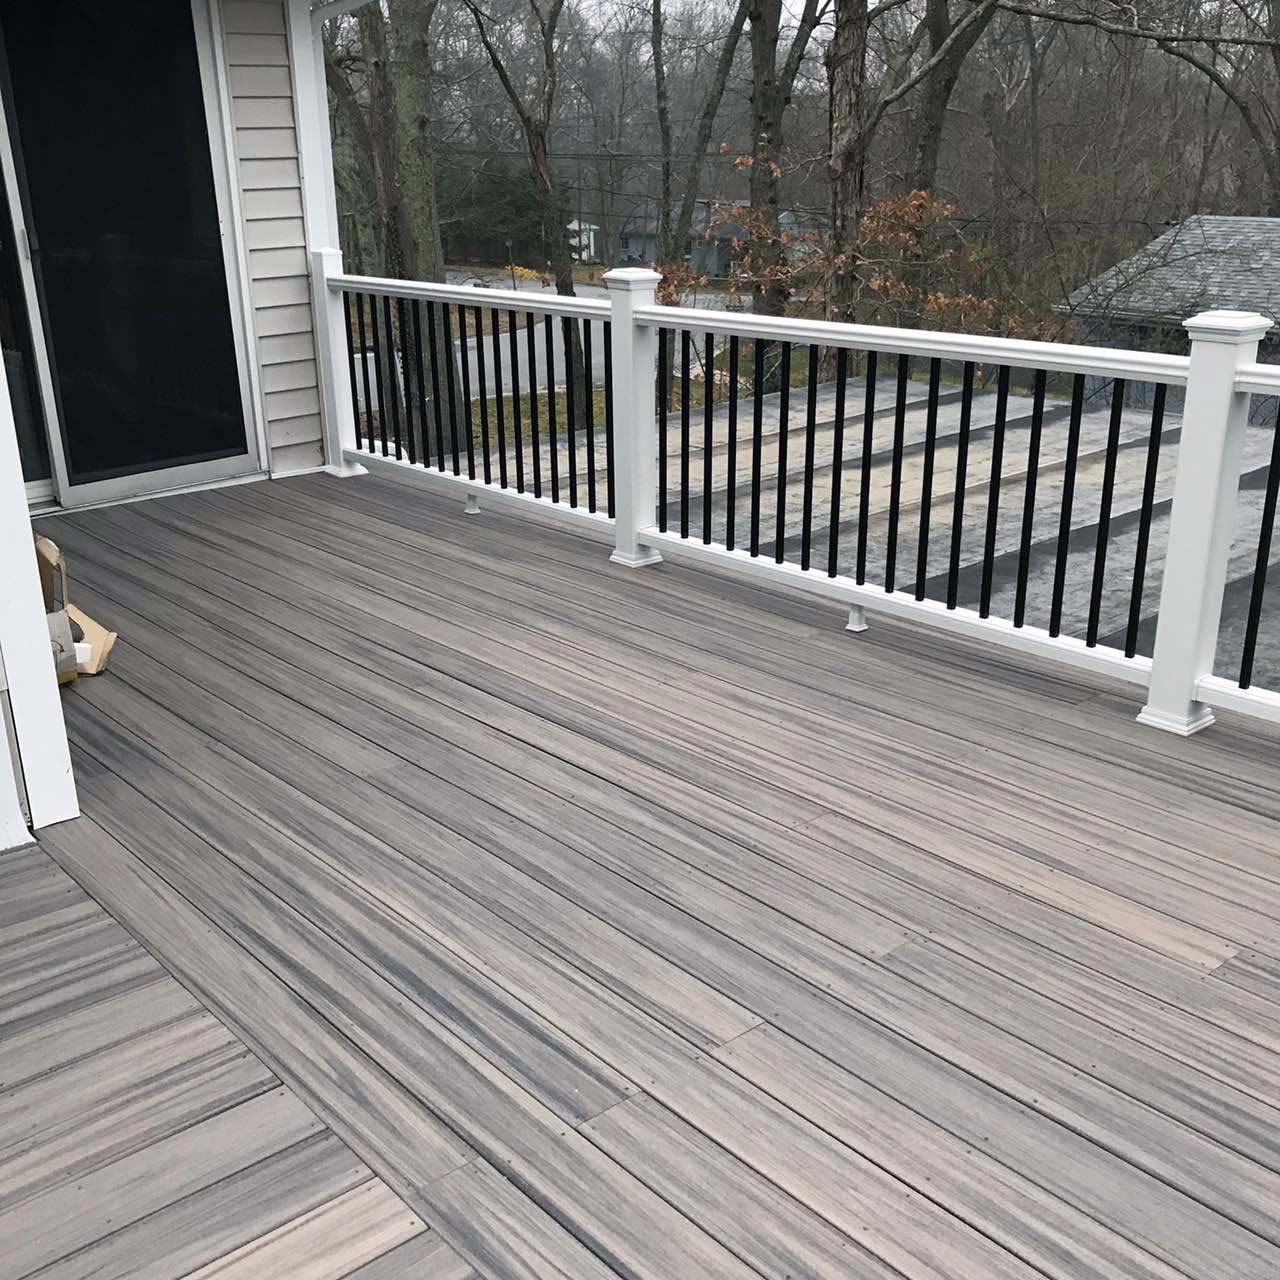 New Wood Deck With A View